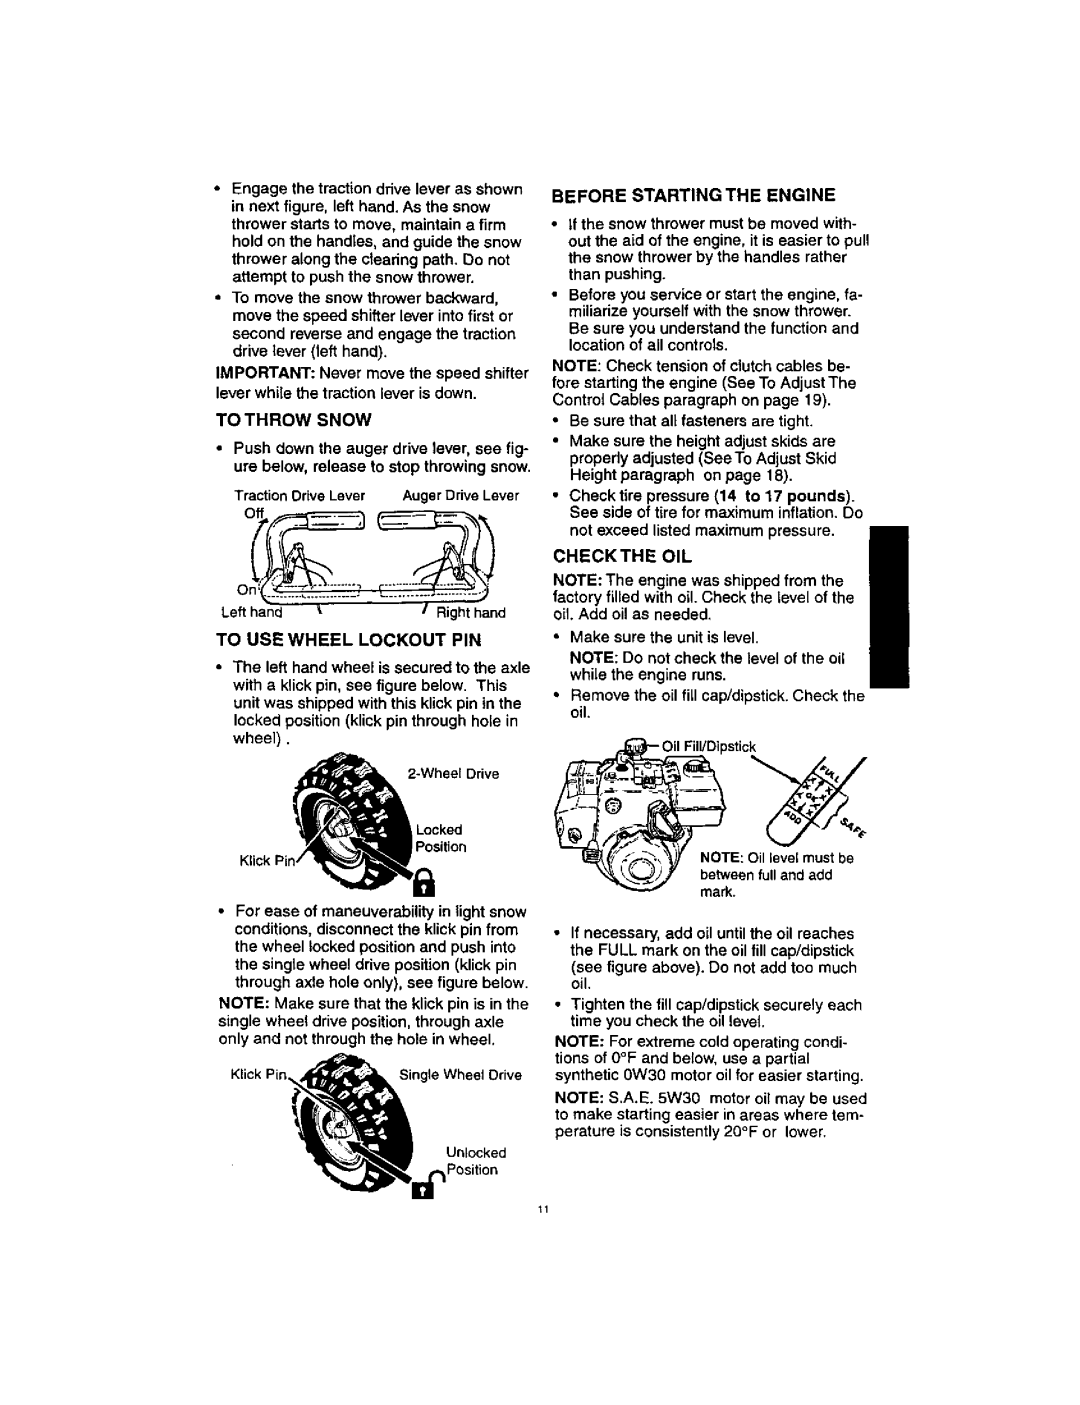 Craftsman 536.88123 operating instructions To Throw Snow, To Use Wheel Lockout Pin, Before Starting The Engine, Checkthe 